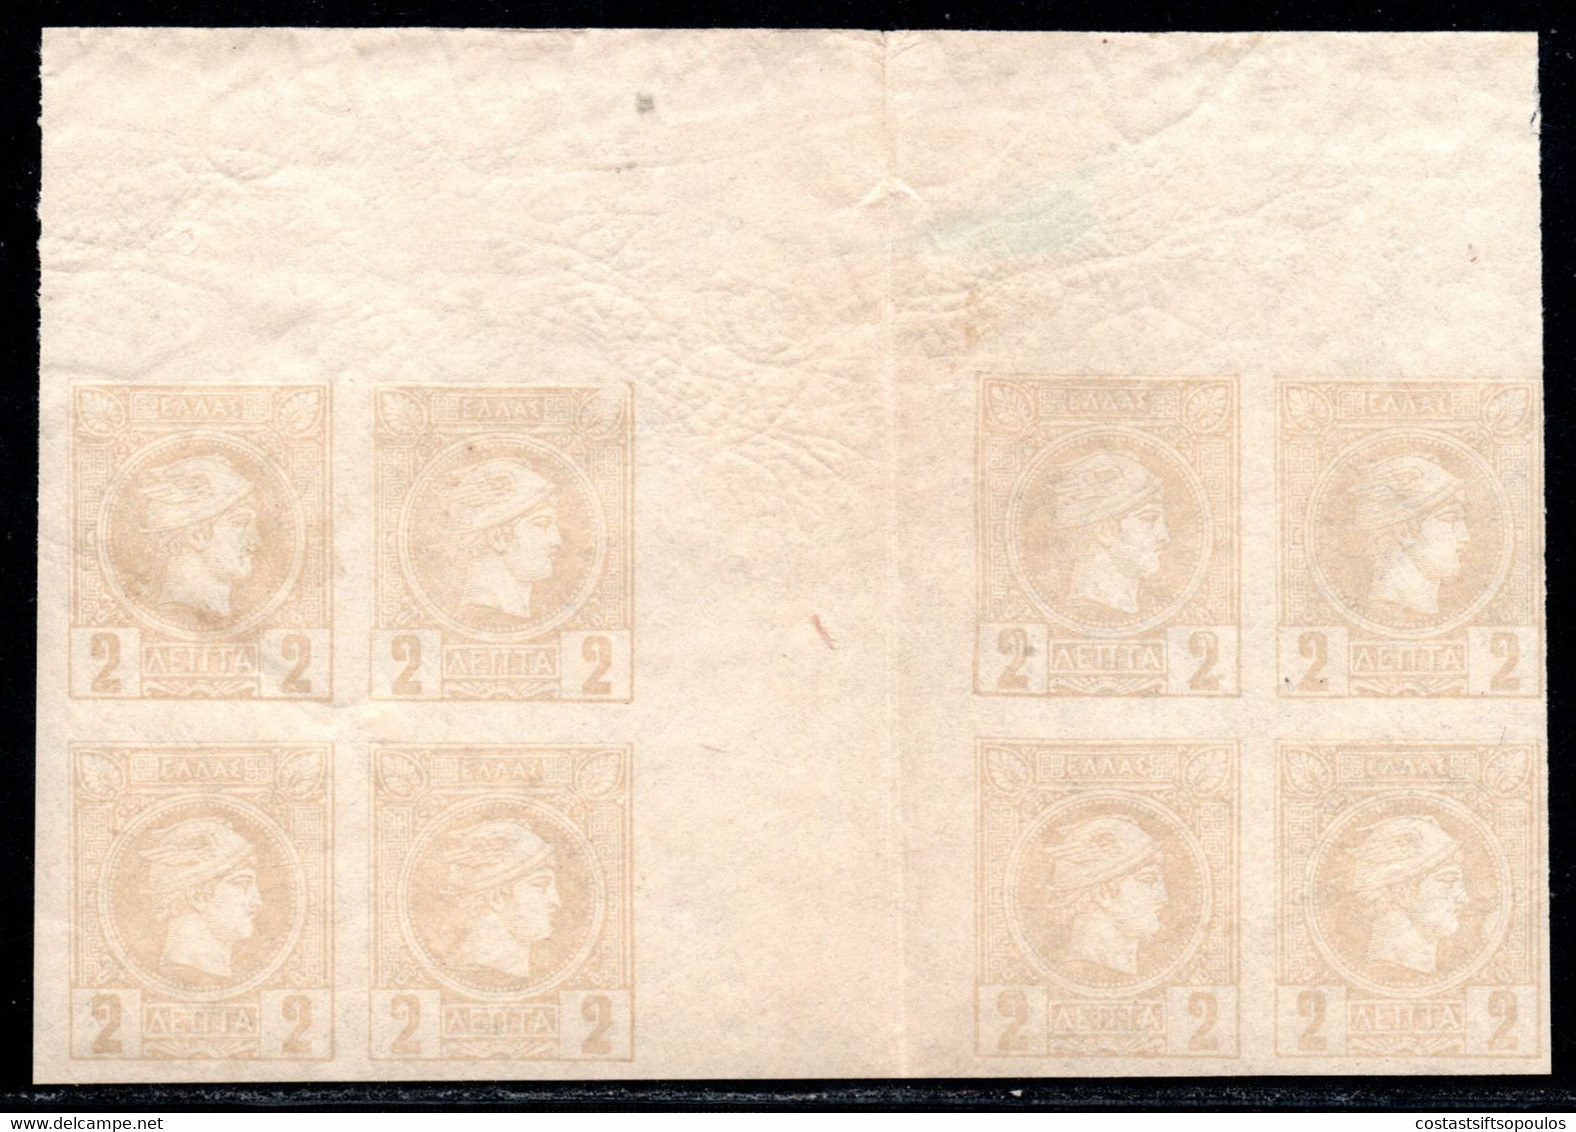 940.GREECE.2 L. SMALL HERMES HEAD MNH GUTTER BLOCK OF 8,FOLDED VERTICALLY - Unused Stamps